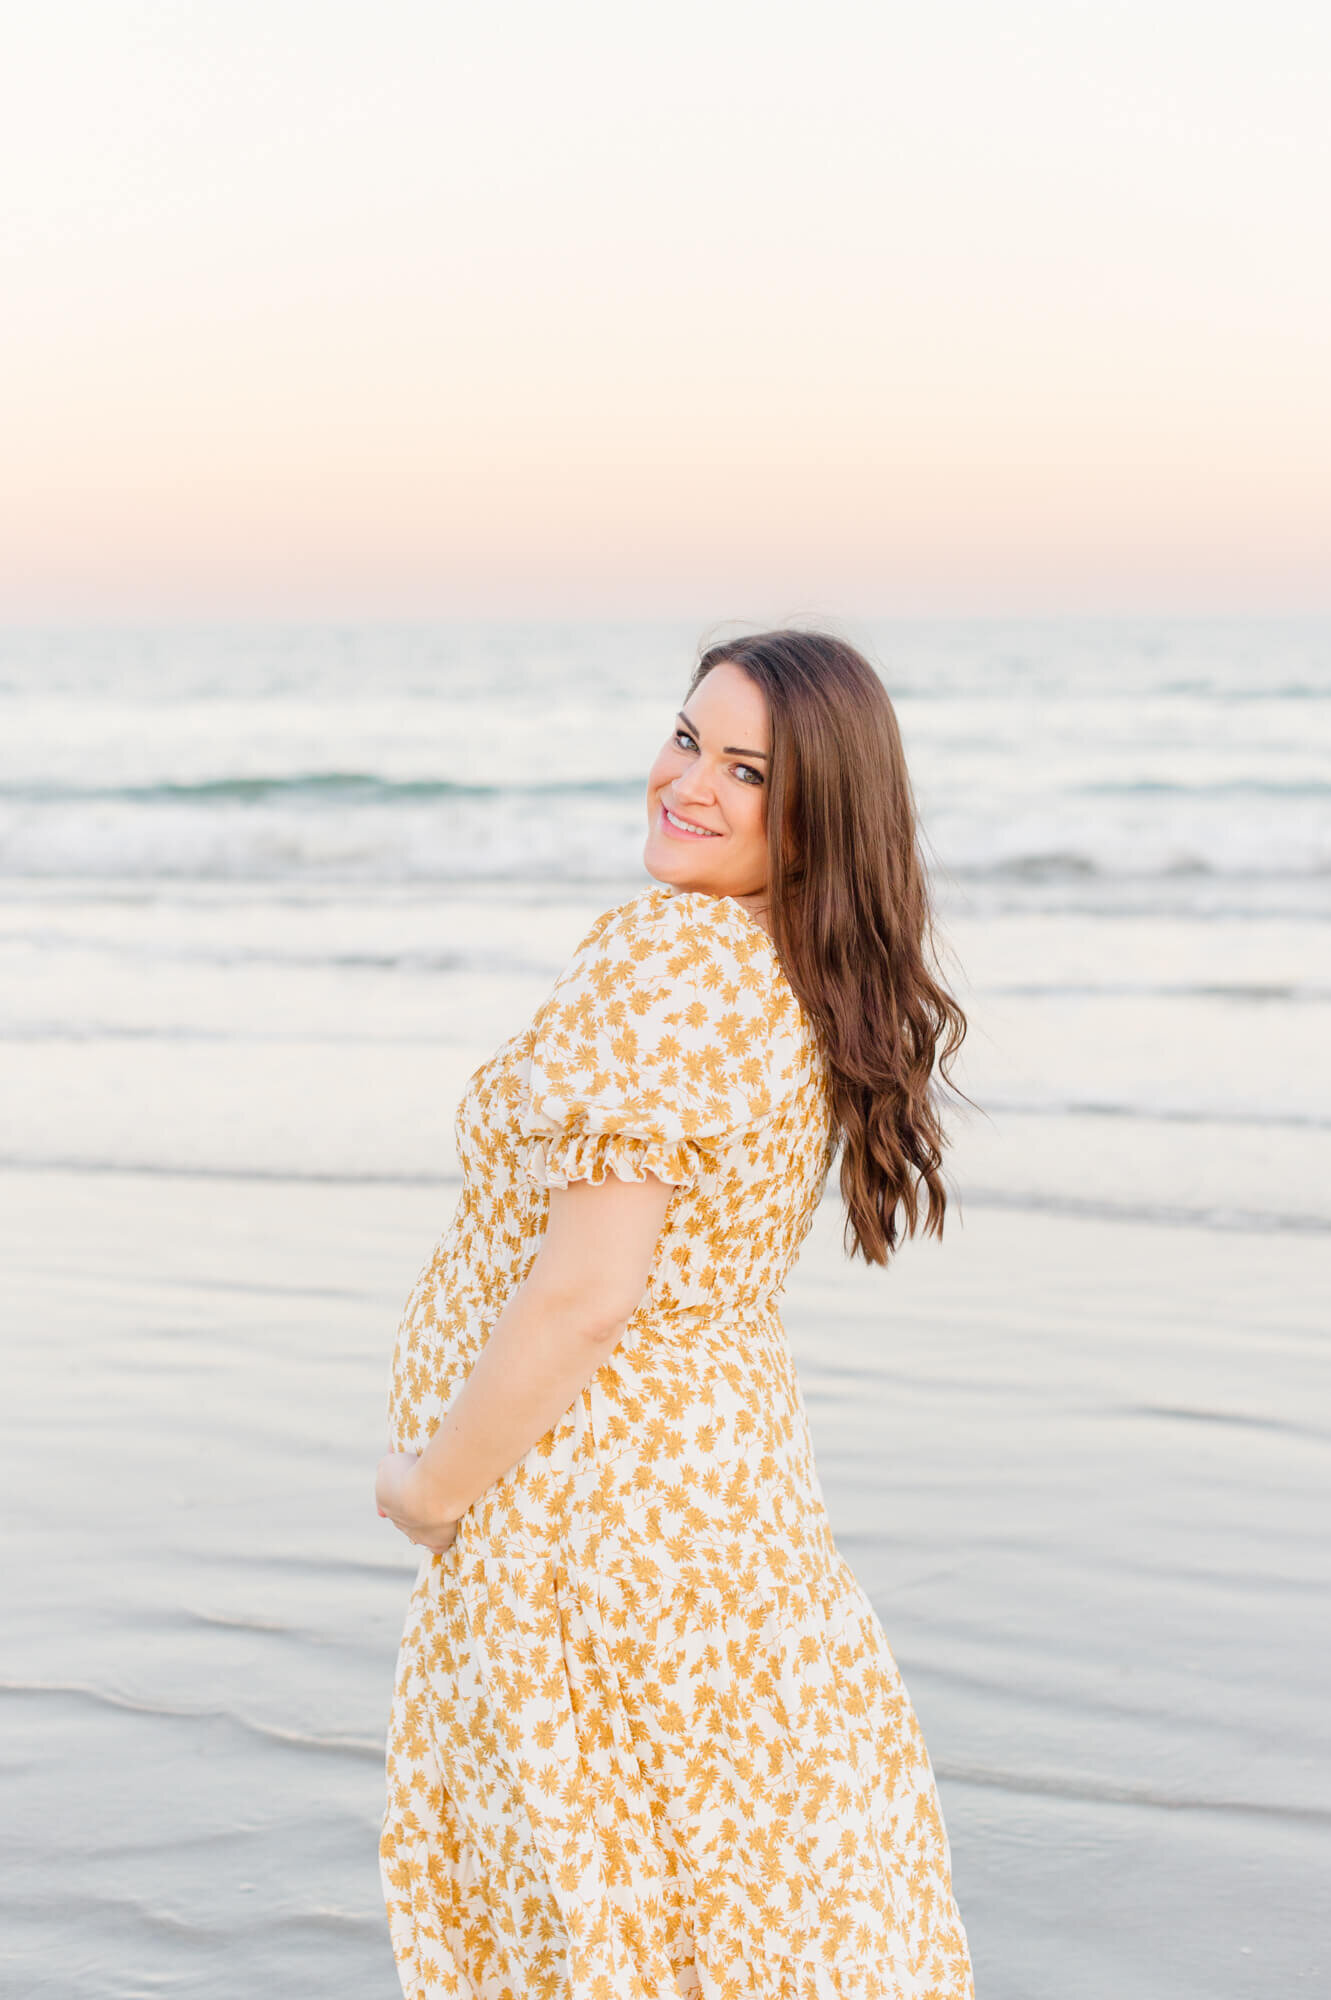 Expectant mother smiles back at the camera while holding her belly on the beach wearing a gorgeous yellow floral dress